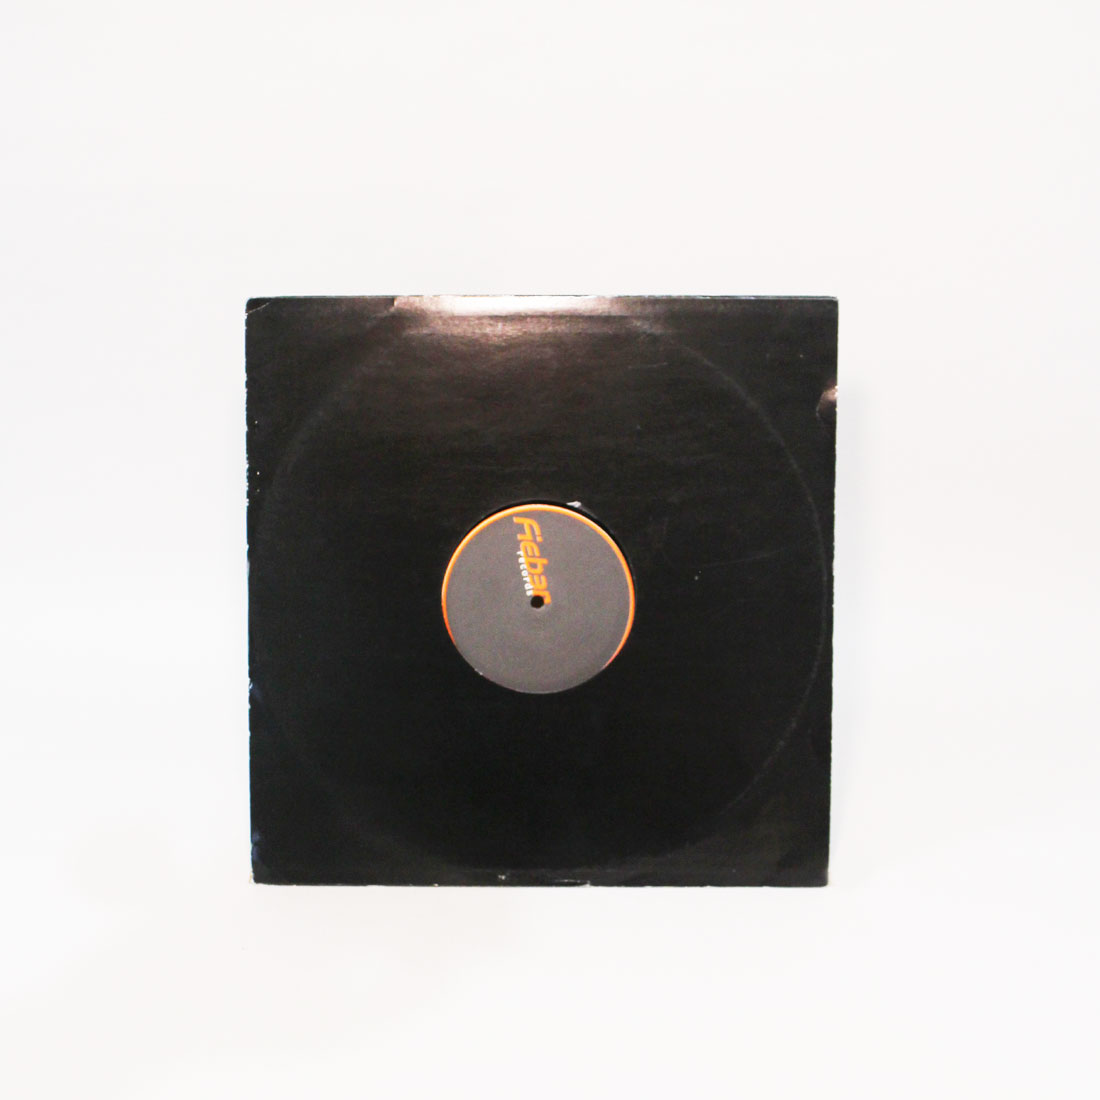 Abstract Soul - Body Blow EP (Vinyl Second Hand) Techno Fieber Records – Fieber003